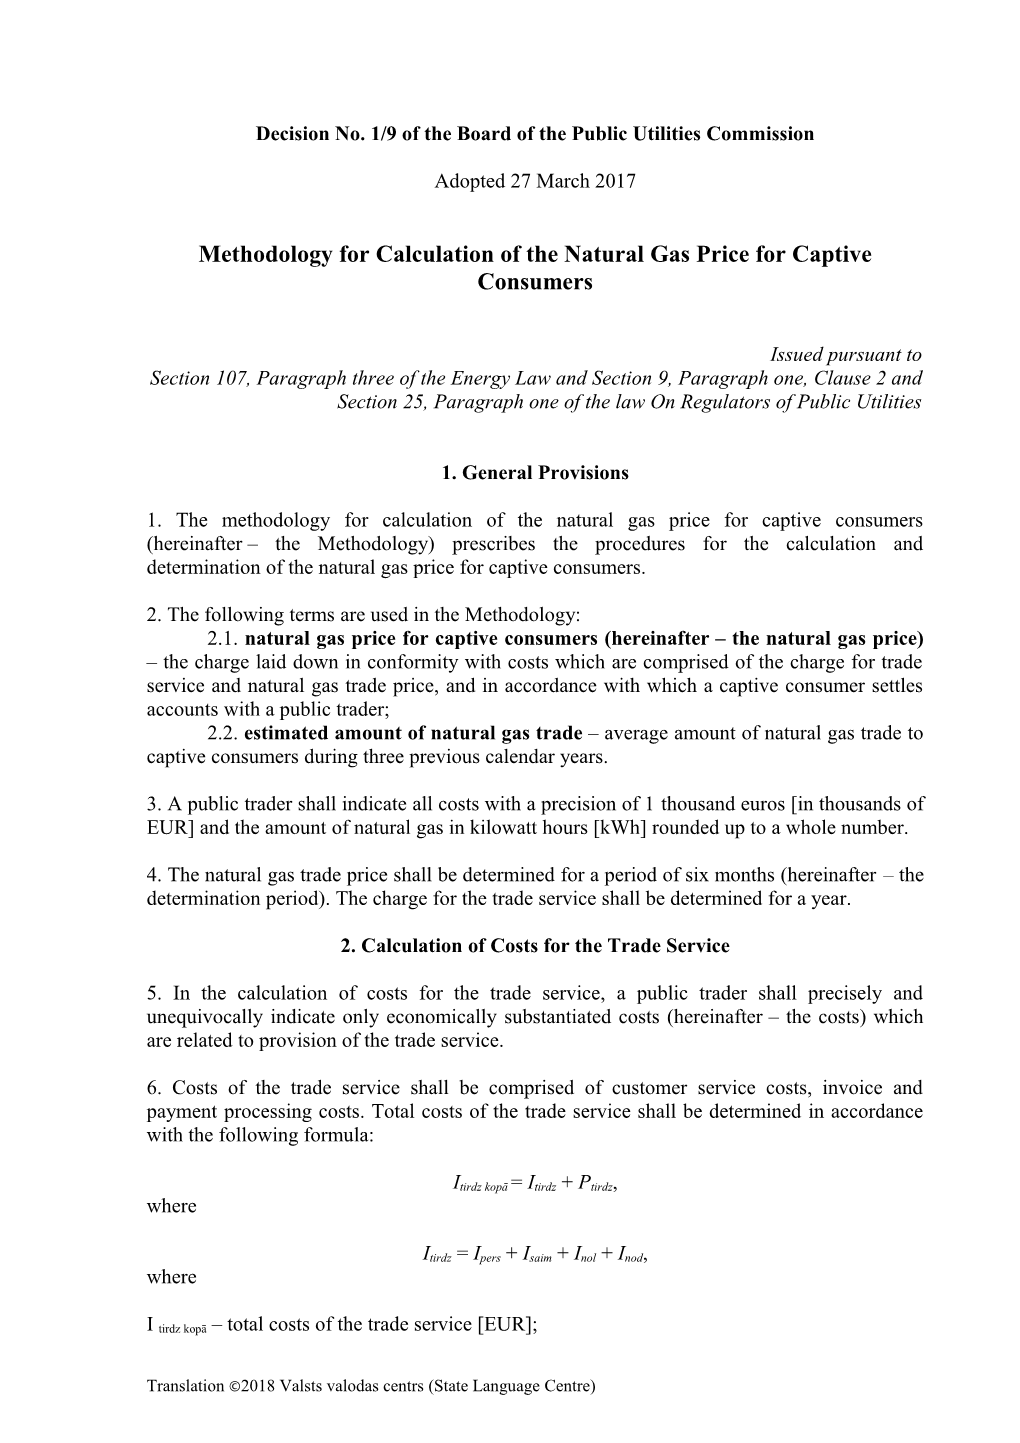 Methodology for Calculation of the Natural Gas Price for Captive Consumers